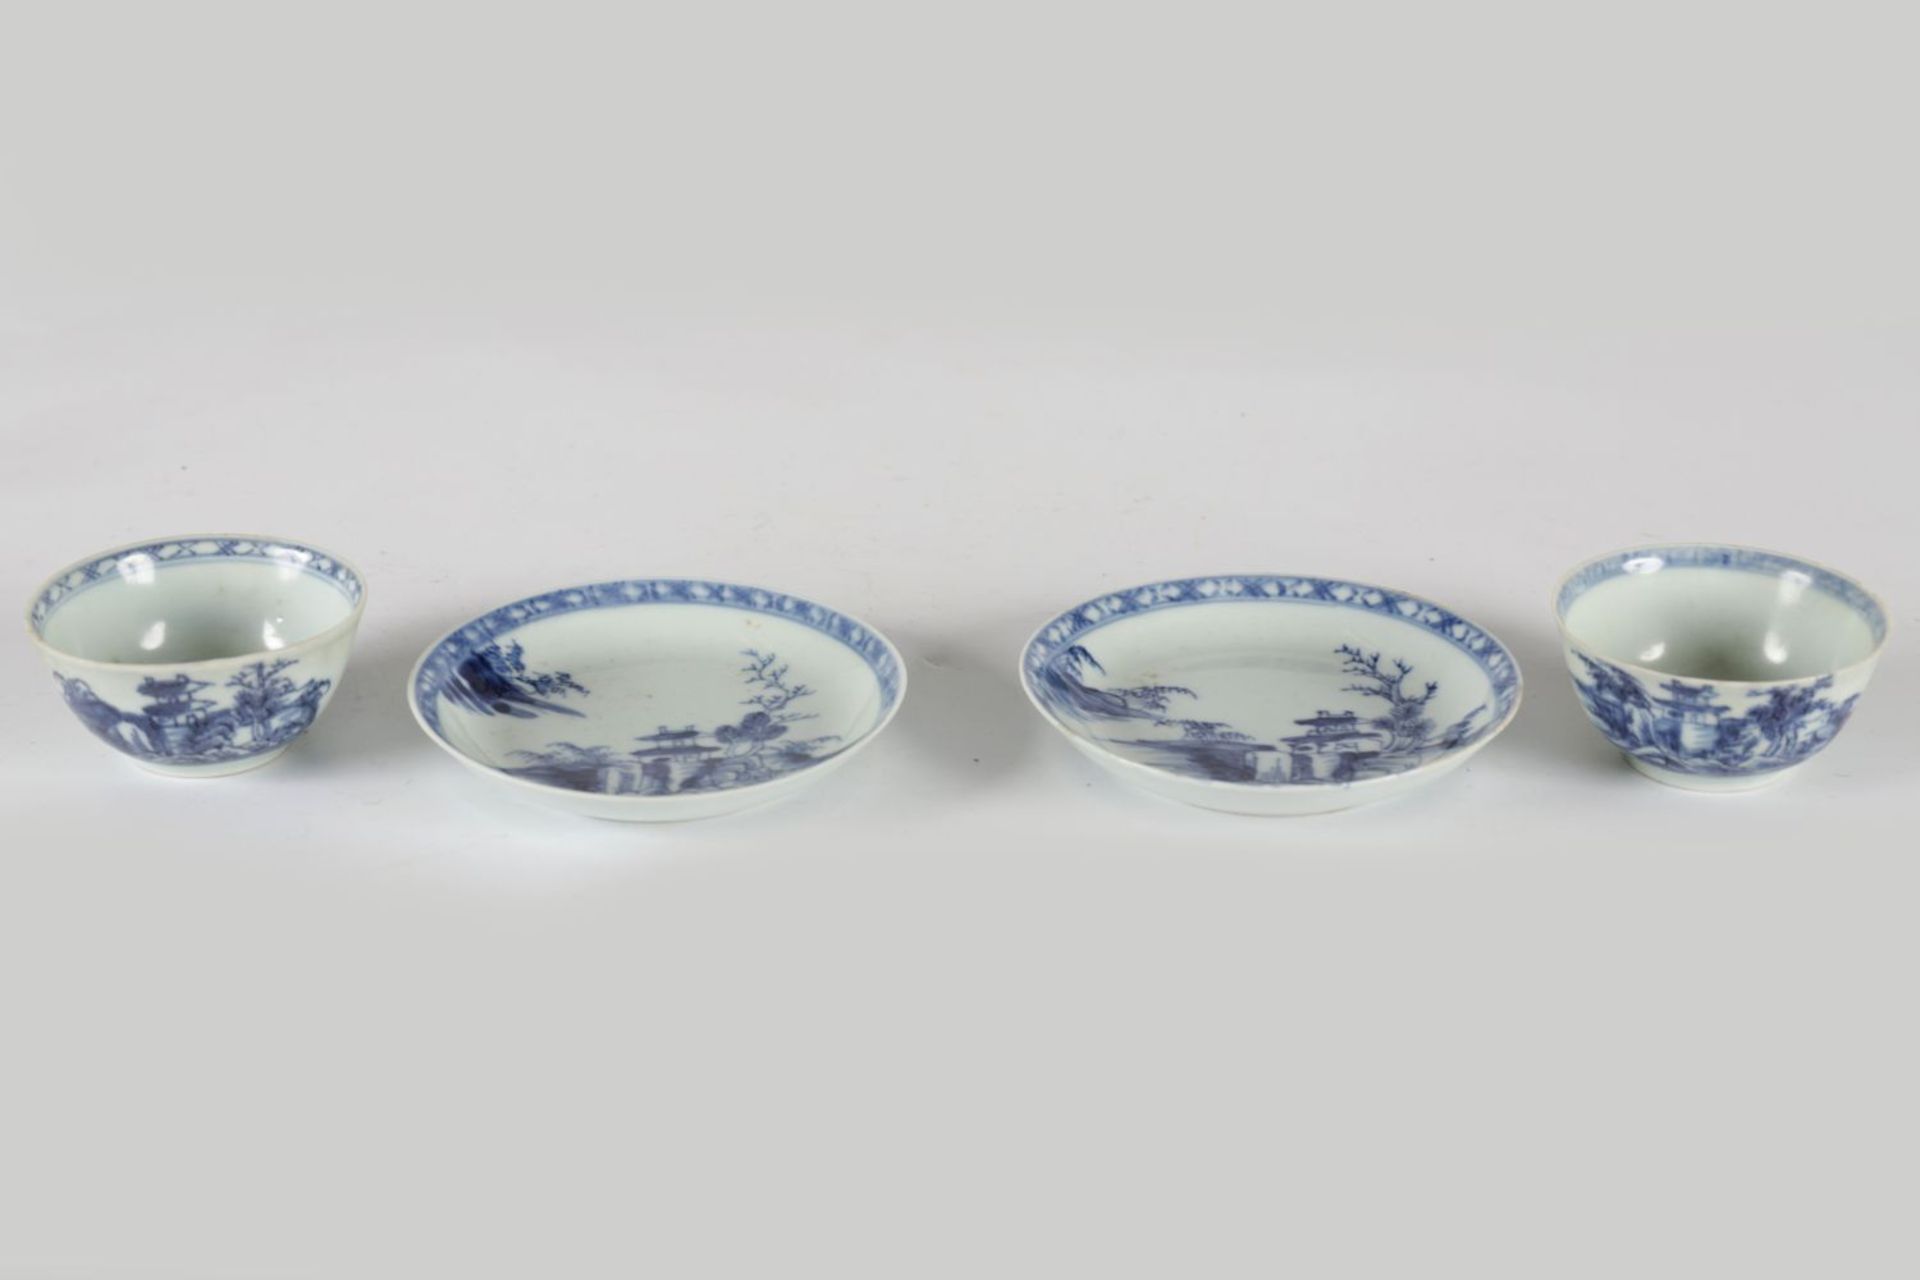 2 CHINESE NANKING CARGO CUPS